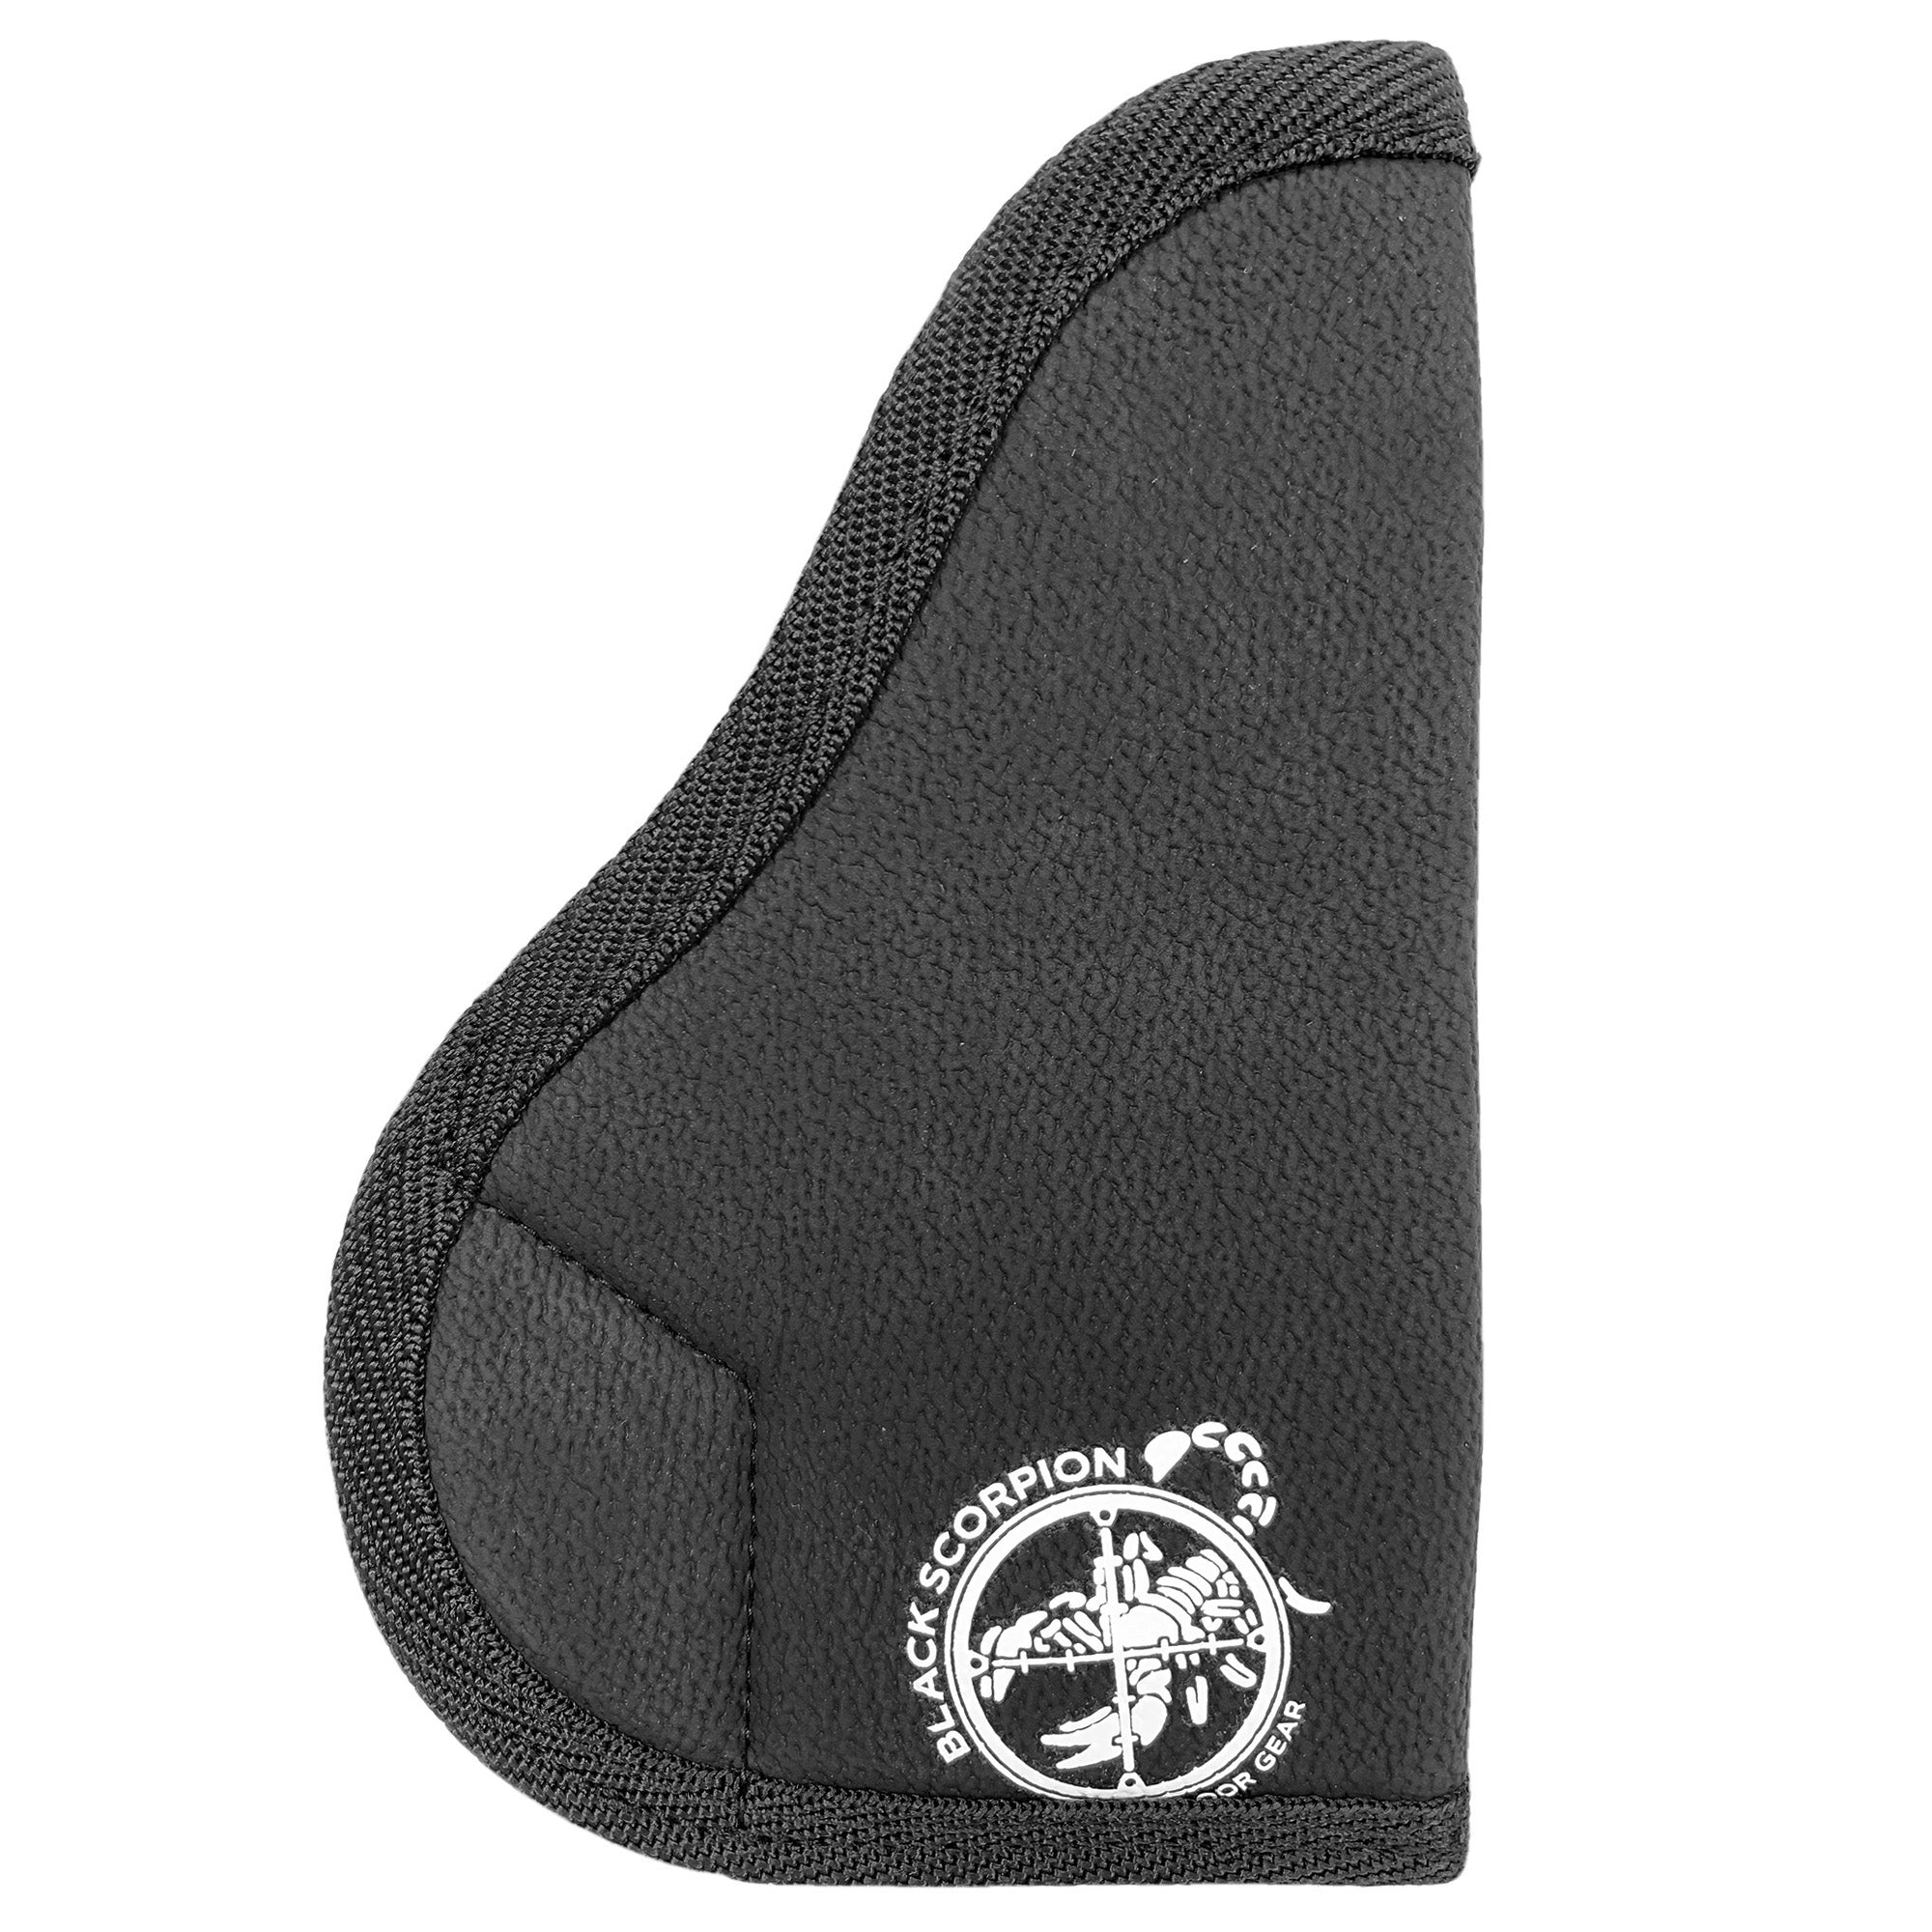 Body Grip Holster fits Single Stack Sub-Compacts Up to 3.6''